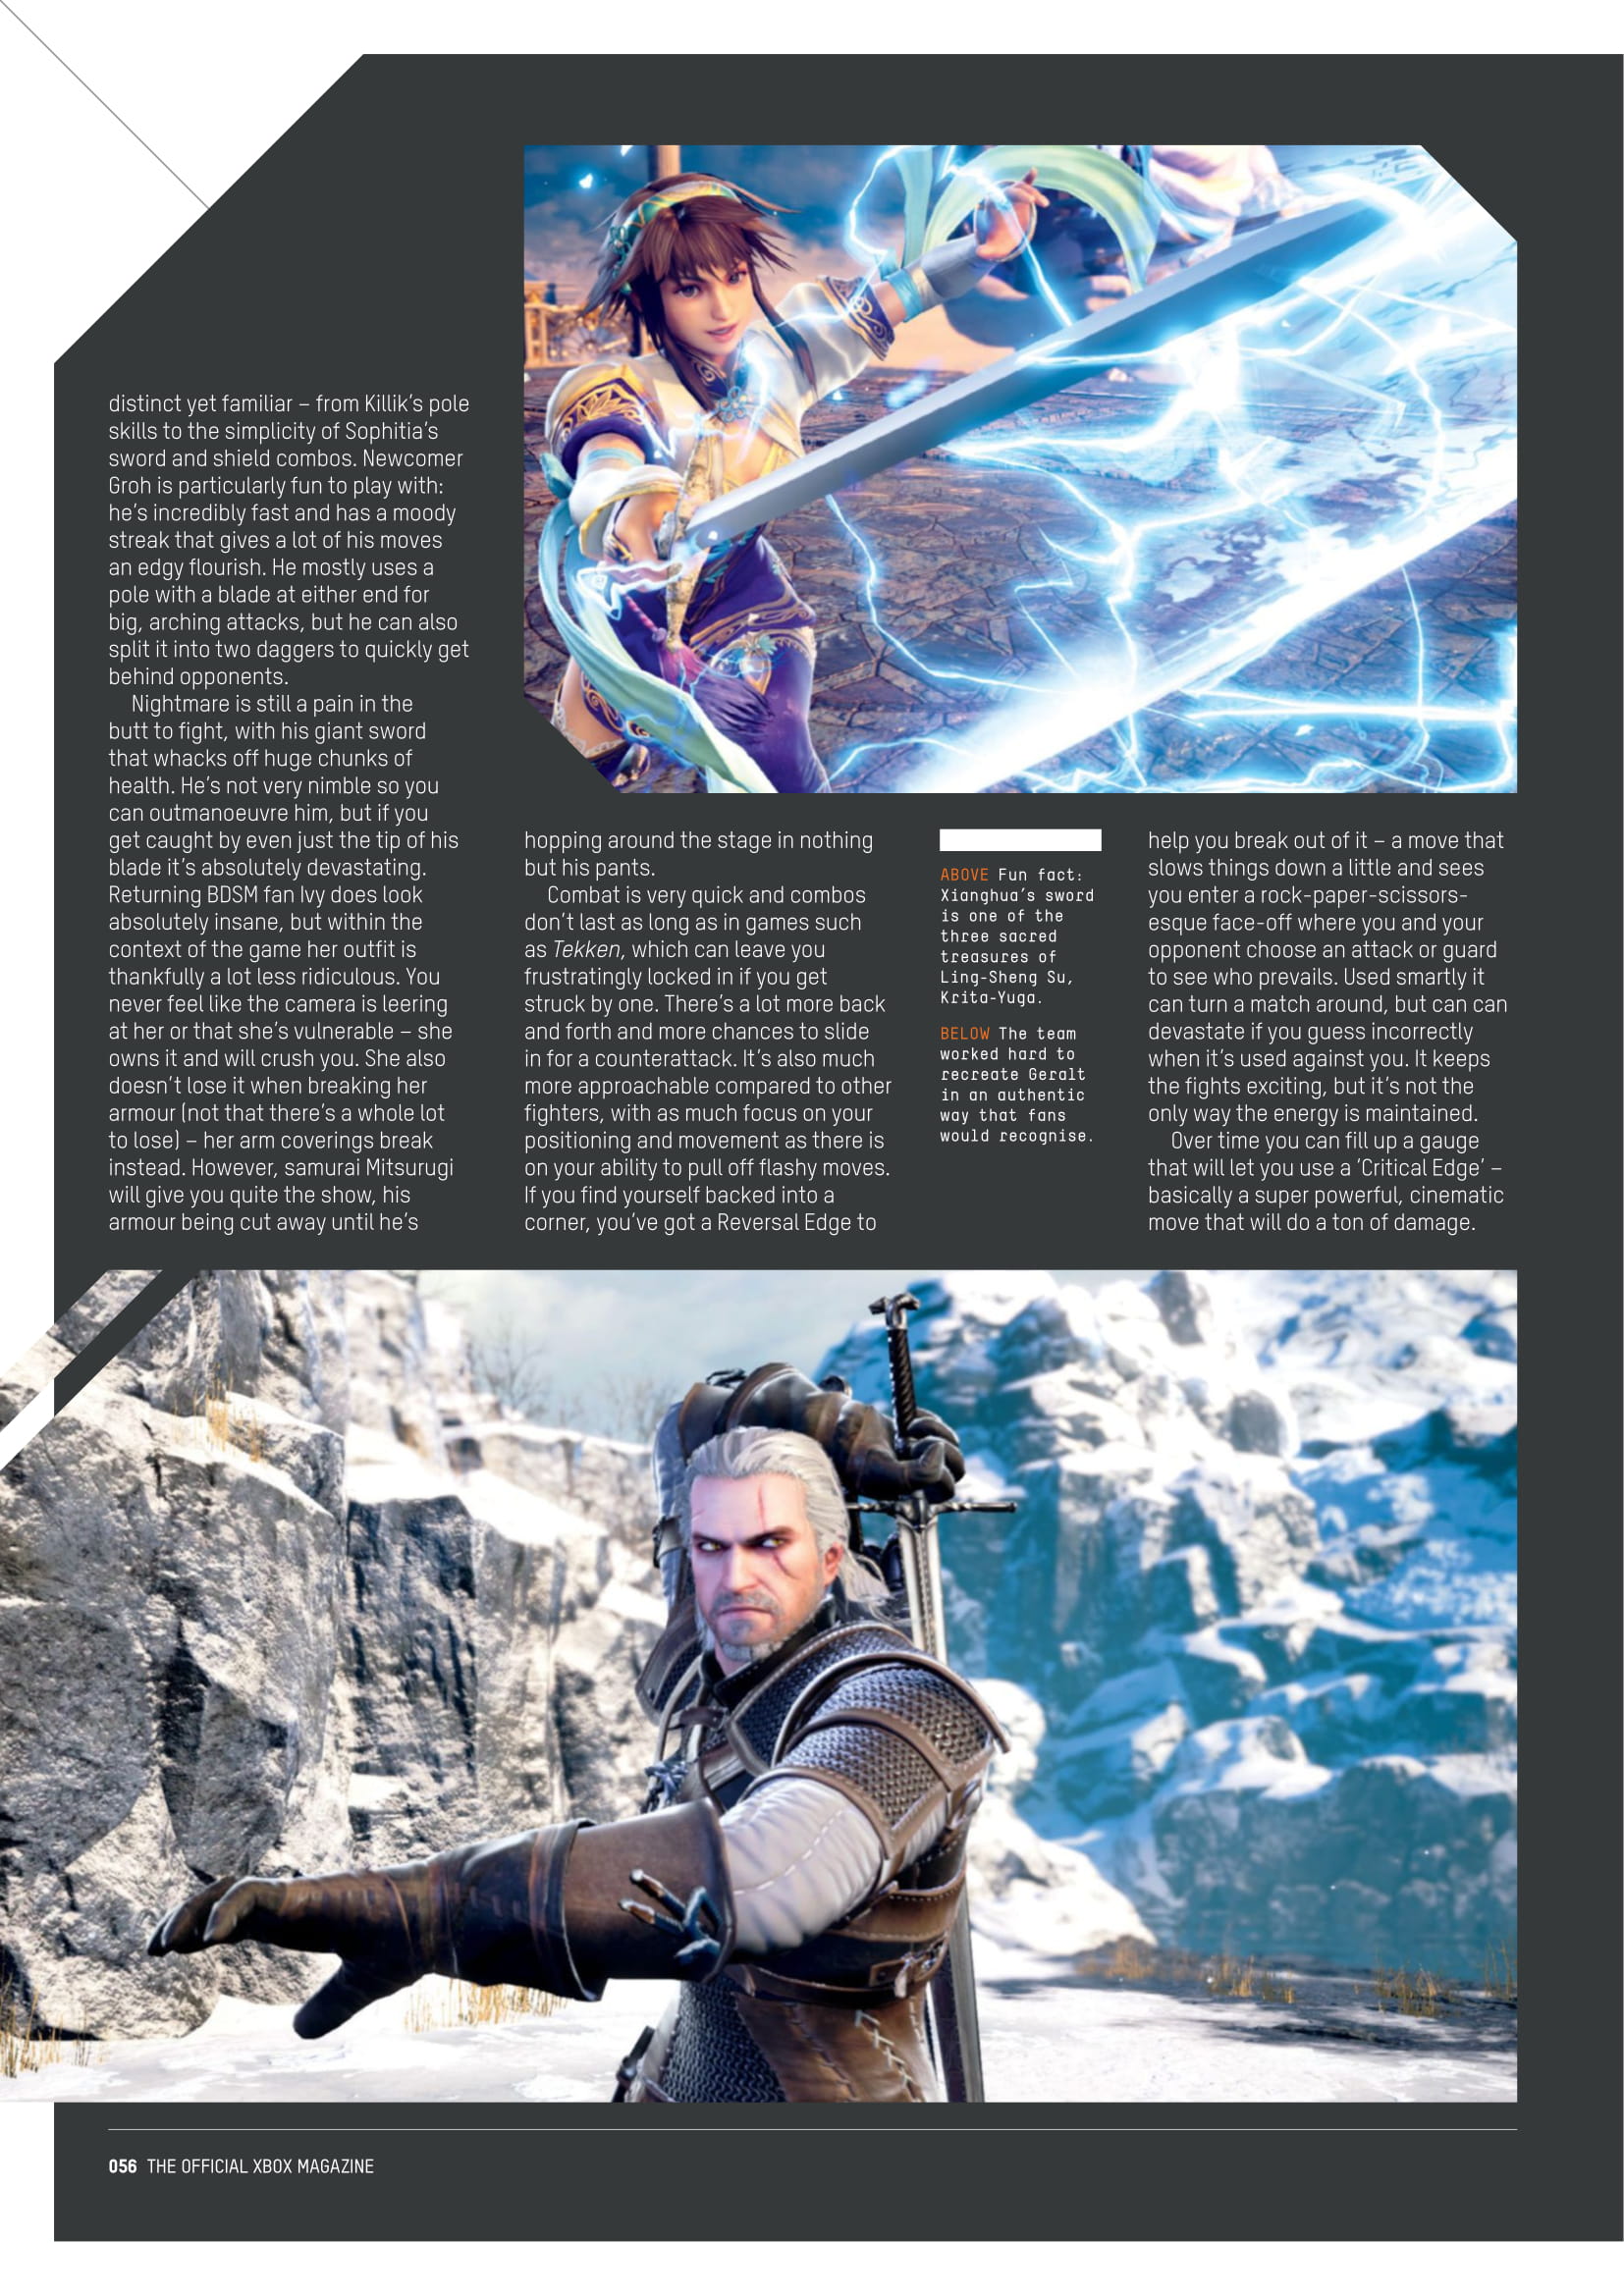 Xbox The Official Magazine - May 2018-056.jpg